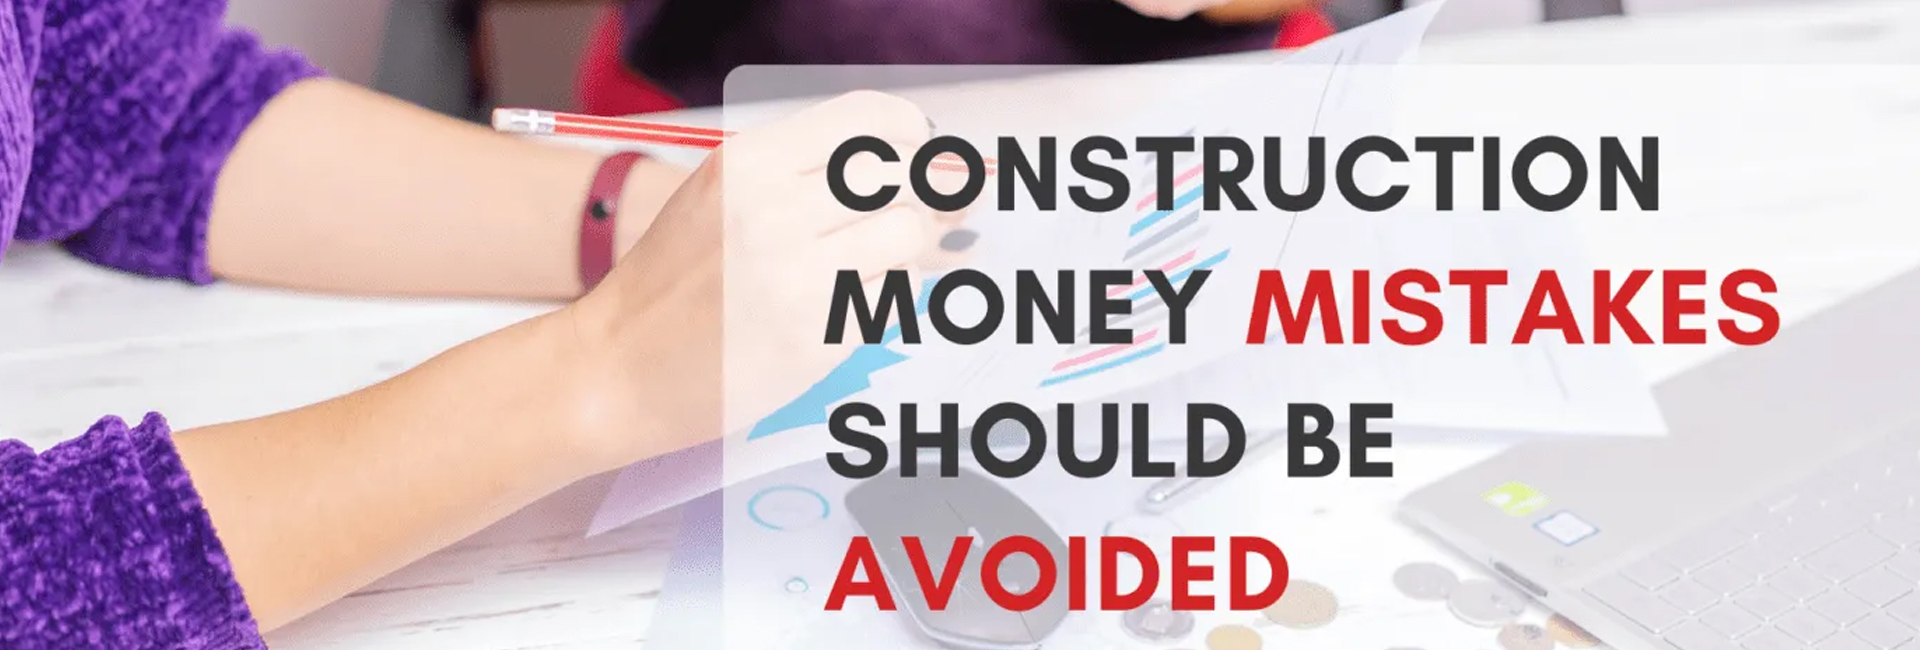 Construction Money Mistakes That Should Be Avoided